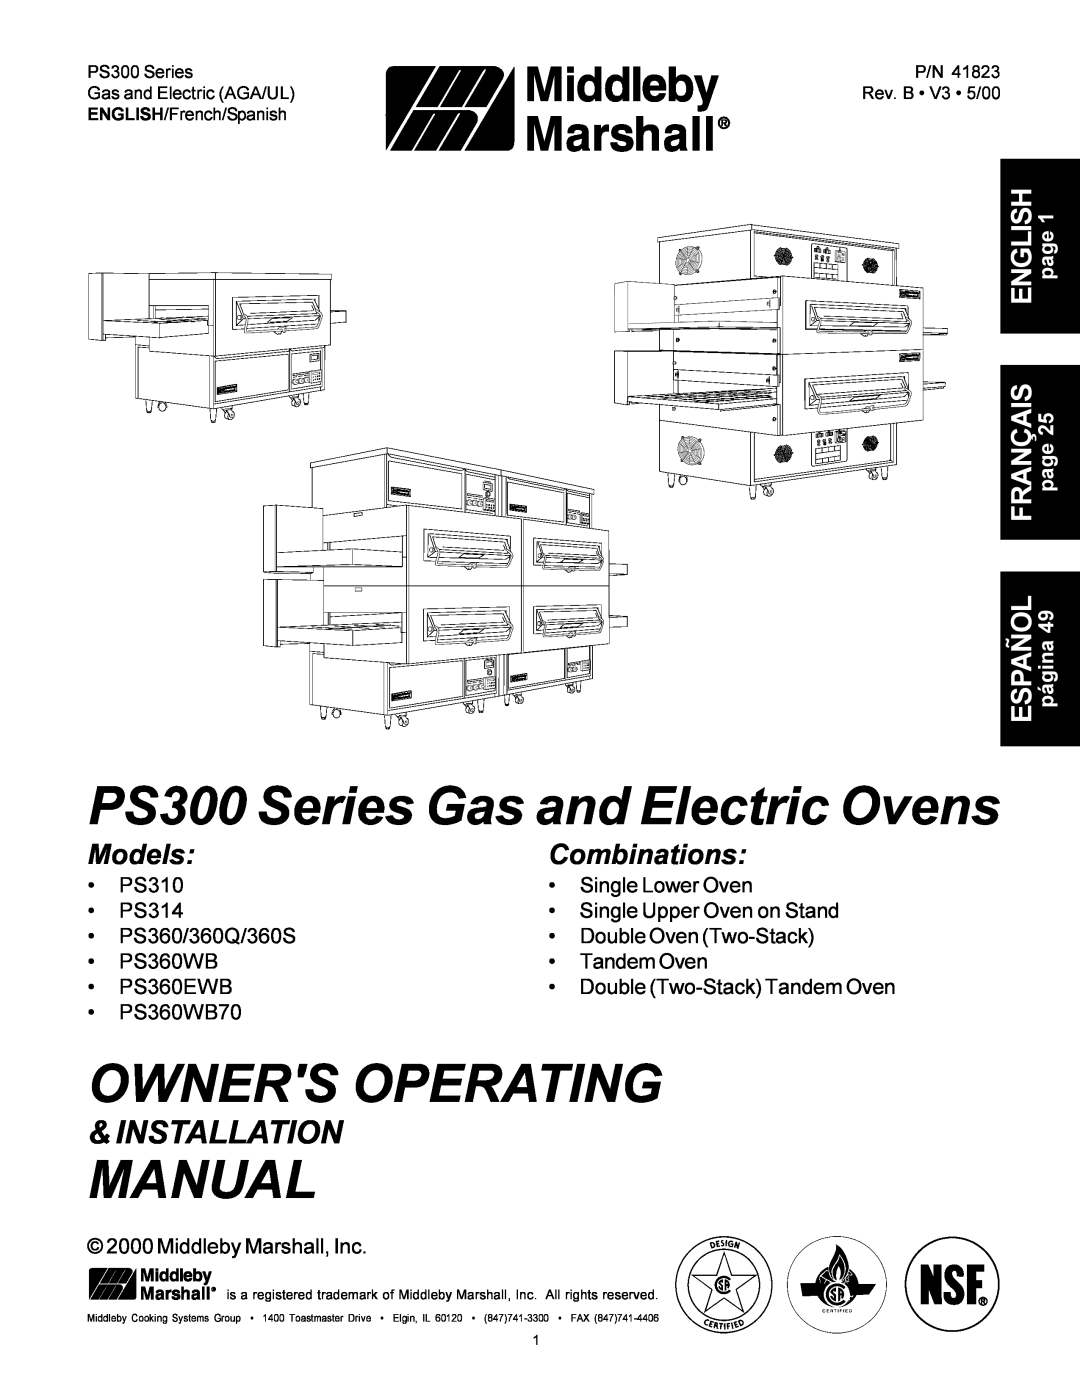 Middleby Marshall PS360 installation manual owners operating & installation manual 